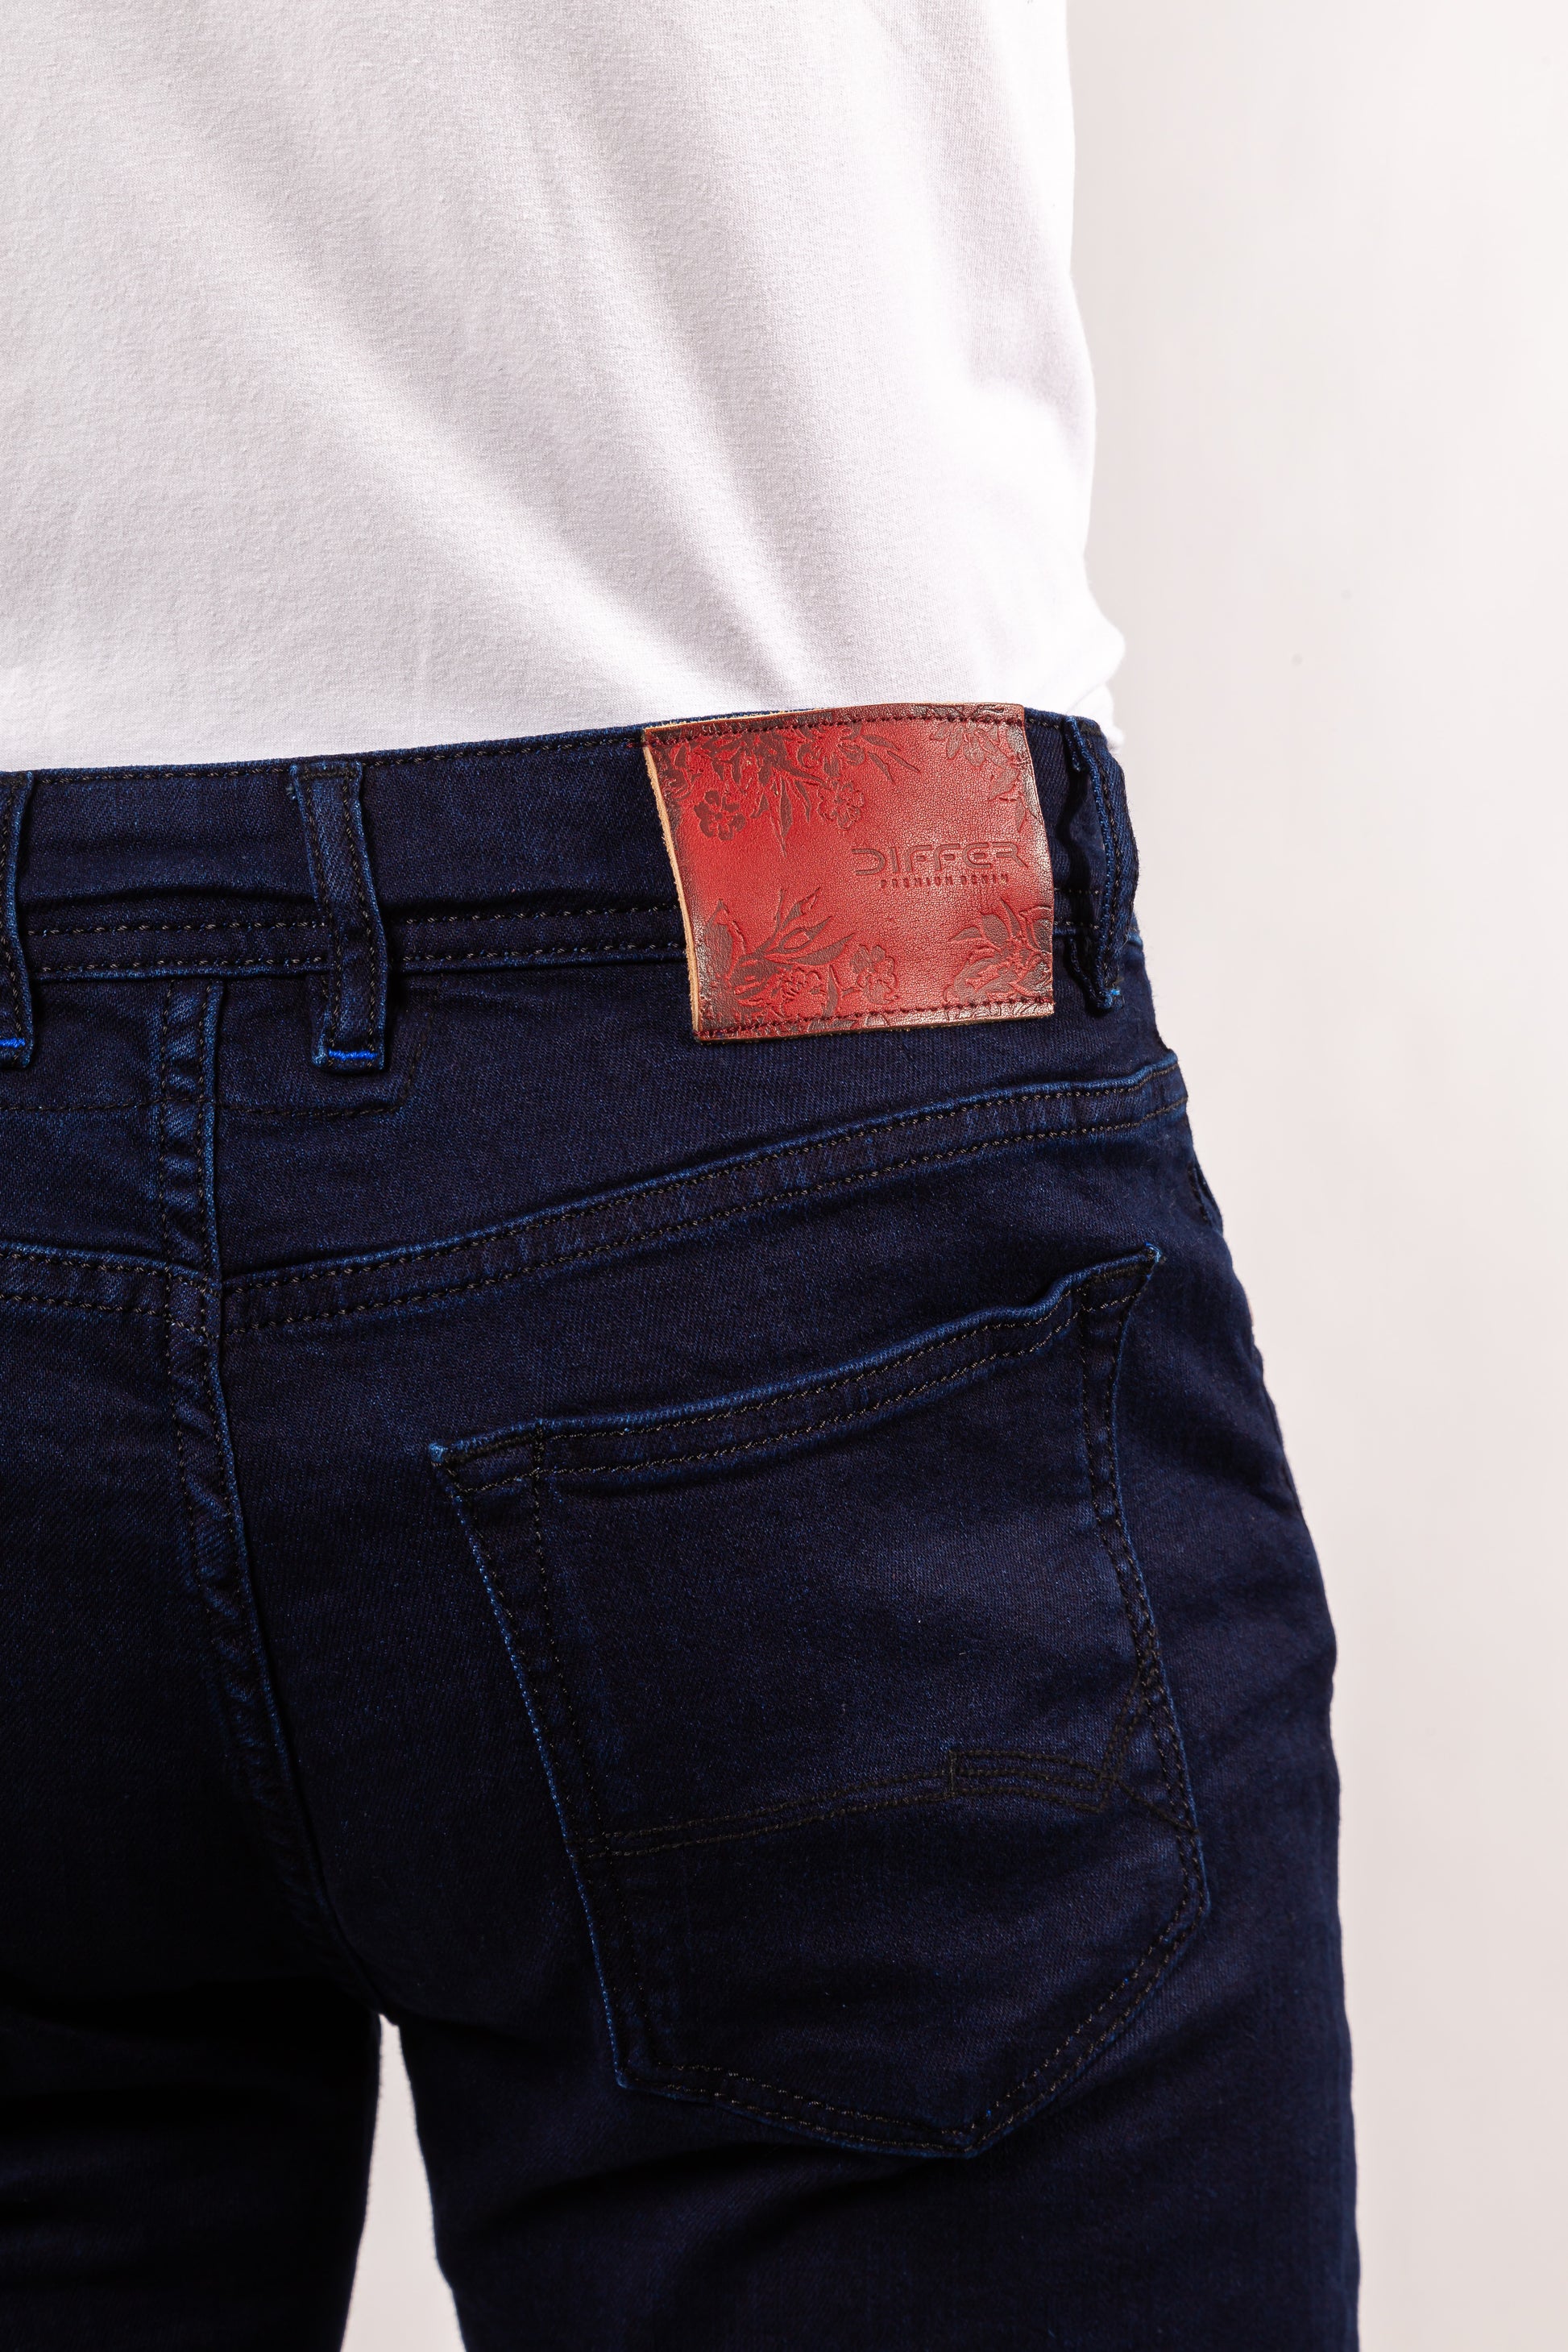 A clean-blue premium fabric makes this denim jean by DFR89 a must have pair that is most versatile with any blazer look.